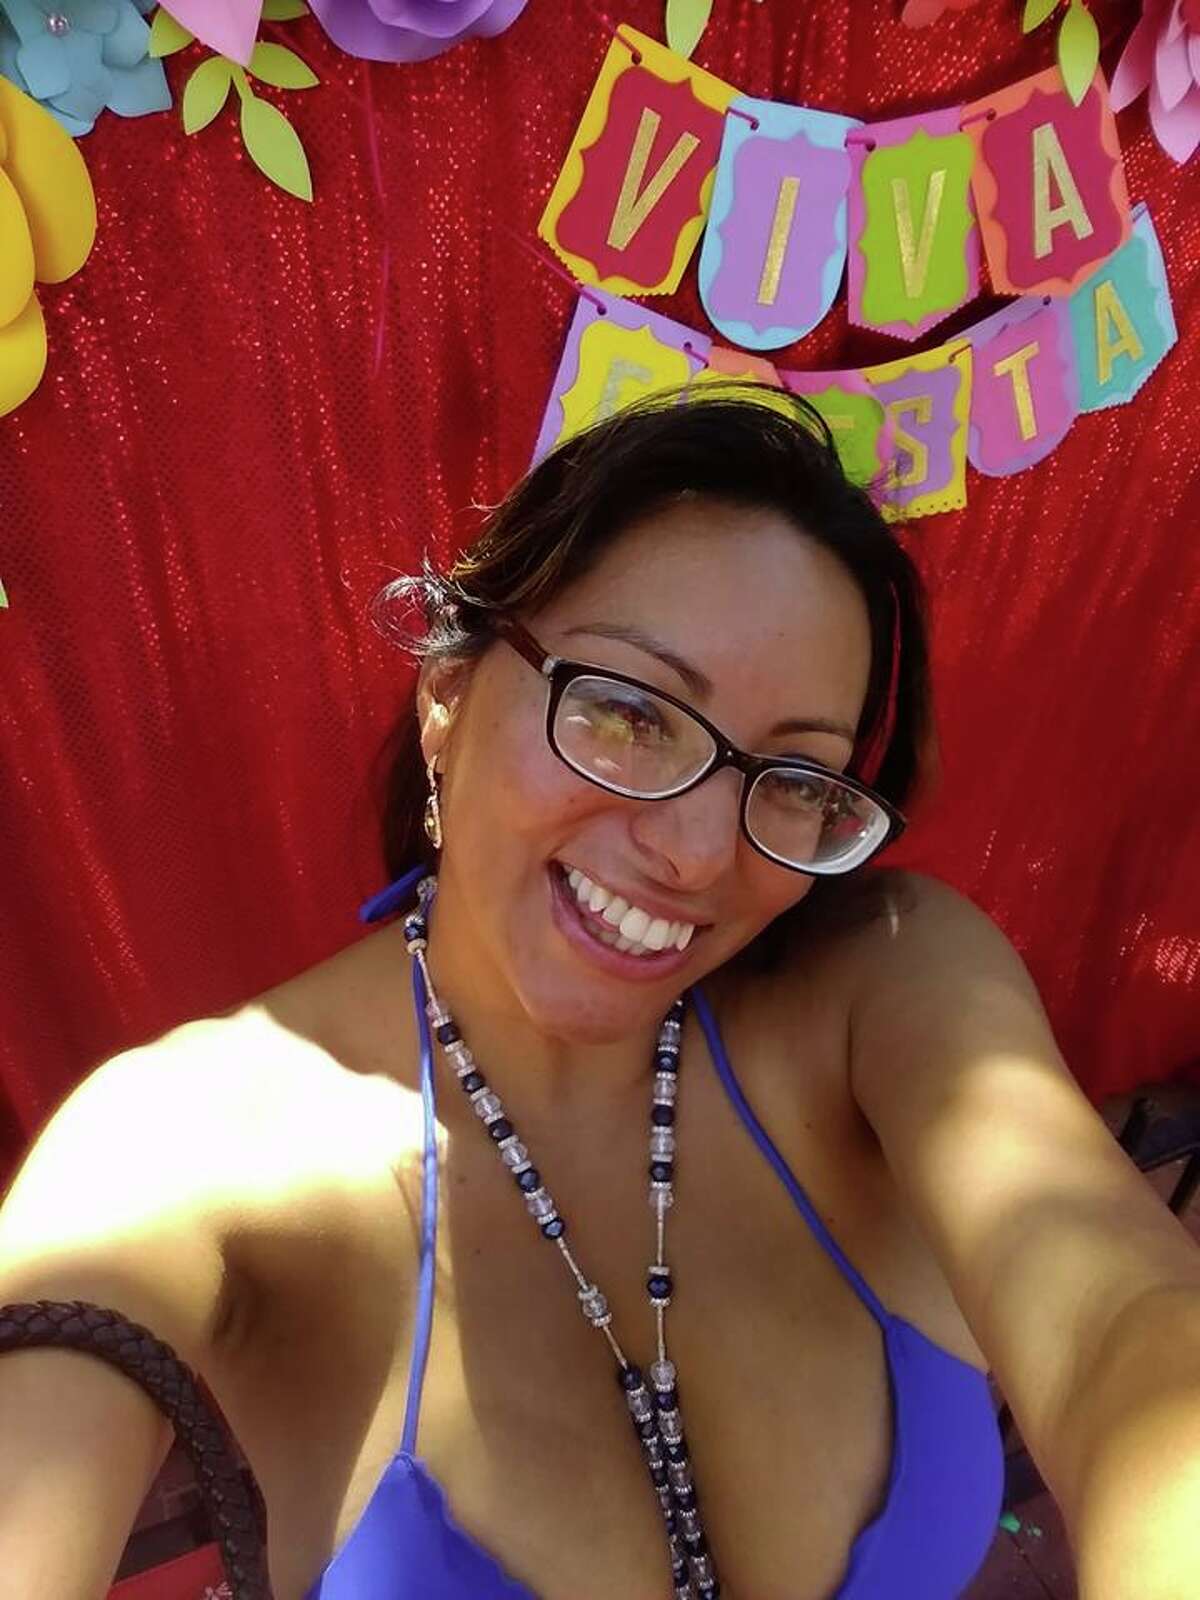 Meet Marquita Richarte, also known as Alondra, also known as Kartel Azteca, also known as the "Fiesta Sucia." She spoke candidly with mySA.com after becoming the subject of viral photos, videos and memes showing her dancing around Market Square's Fiesta celebration with a blue string bikini top on.